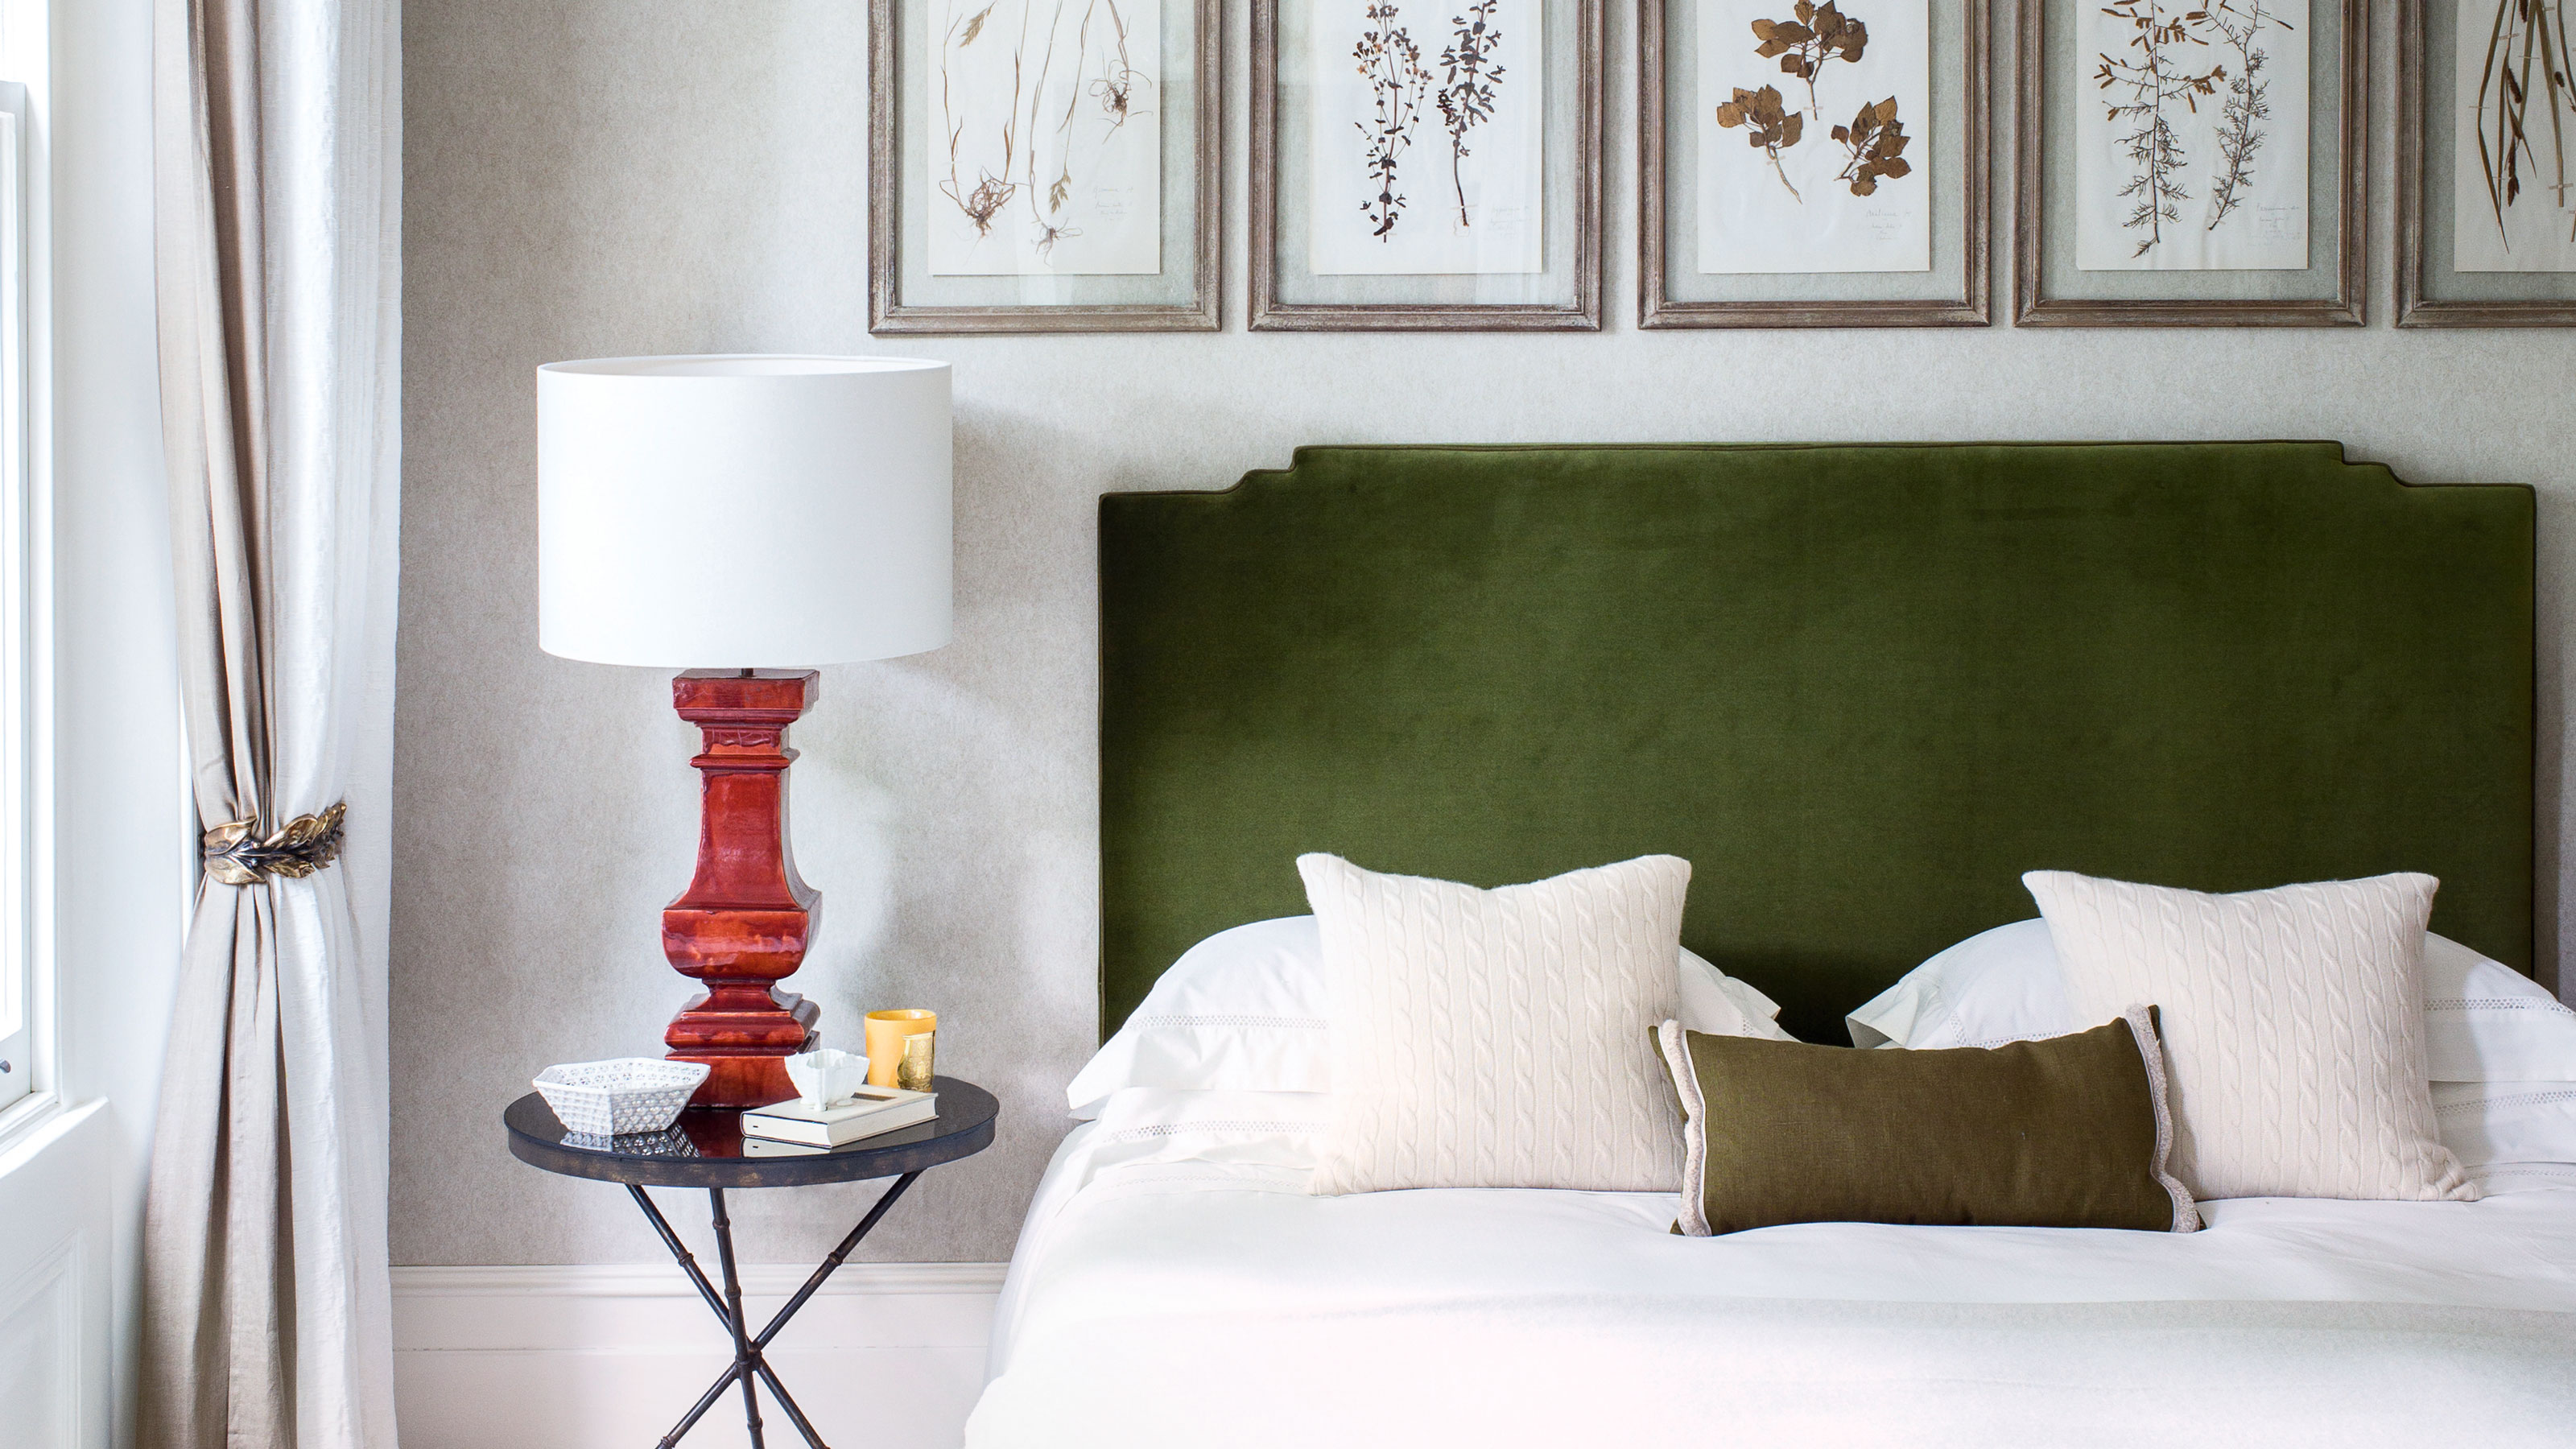 Managing the Feng Shui of a Bed Placed Against a Wall